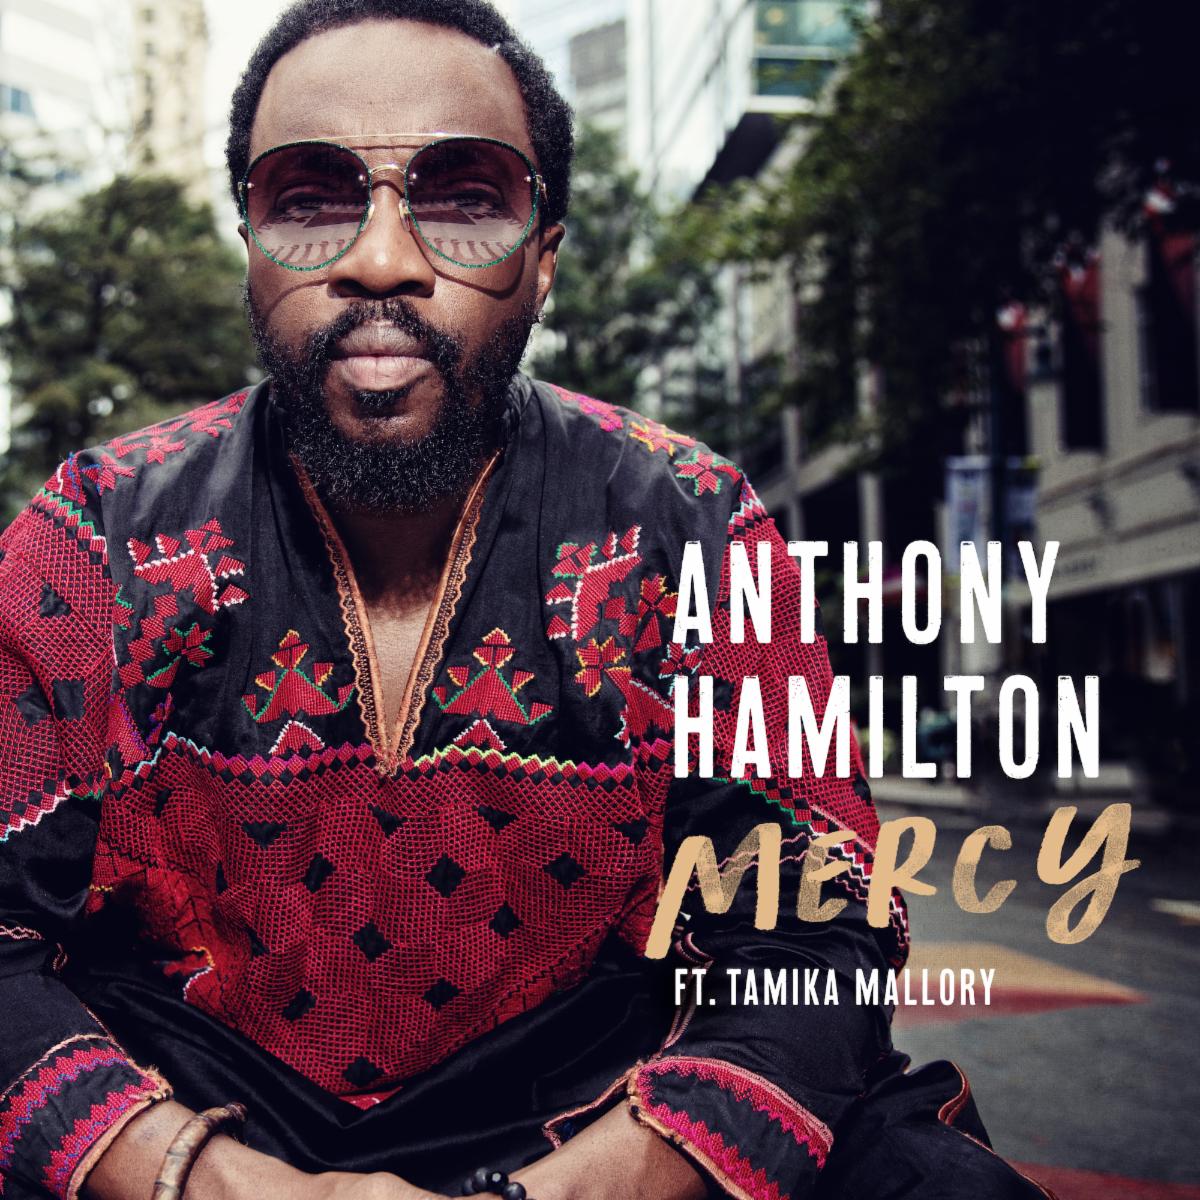 Anthony Hamilton Makes Powerful Statement on New Song "Mercy"